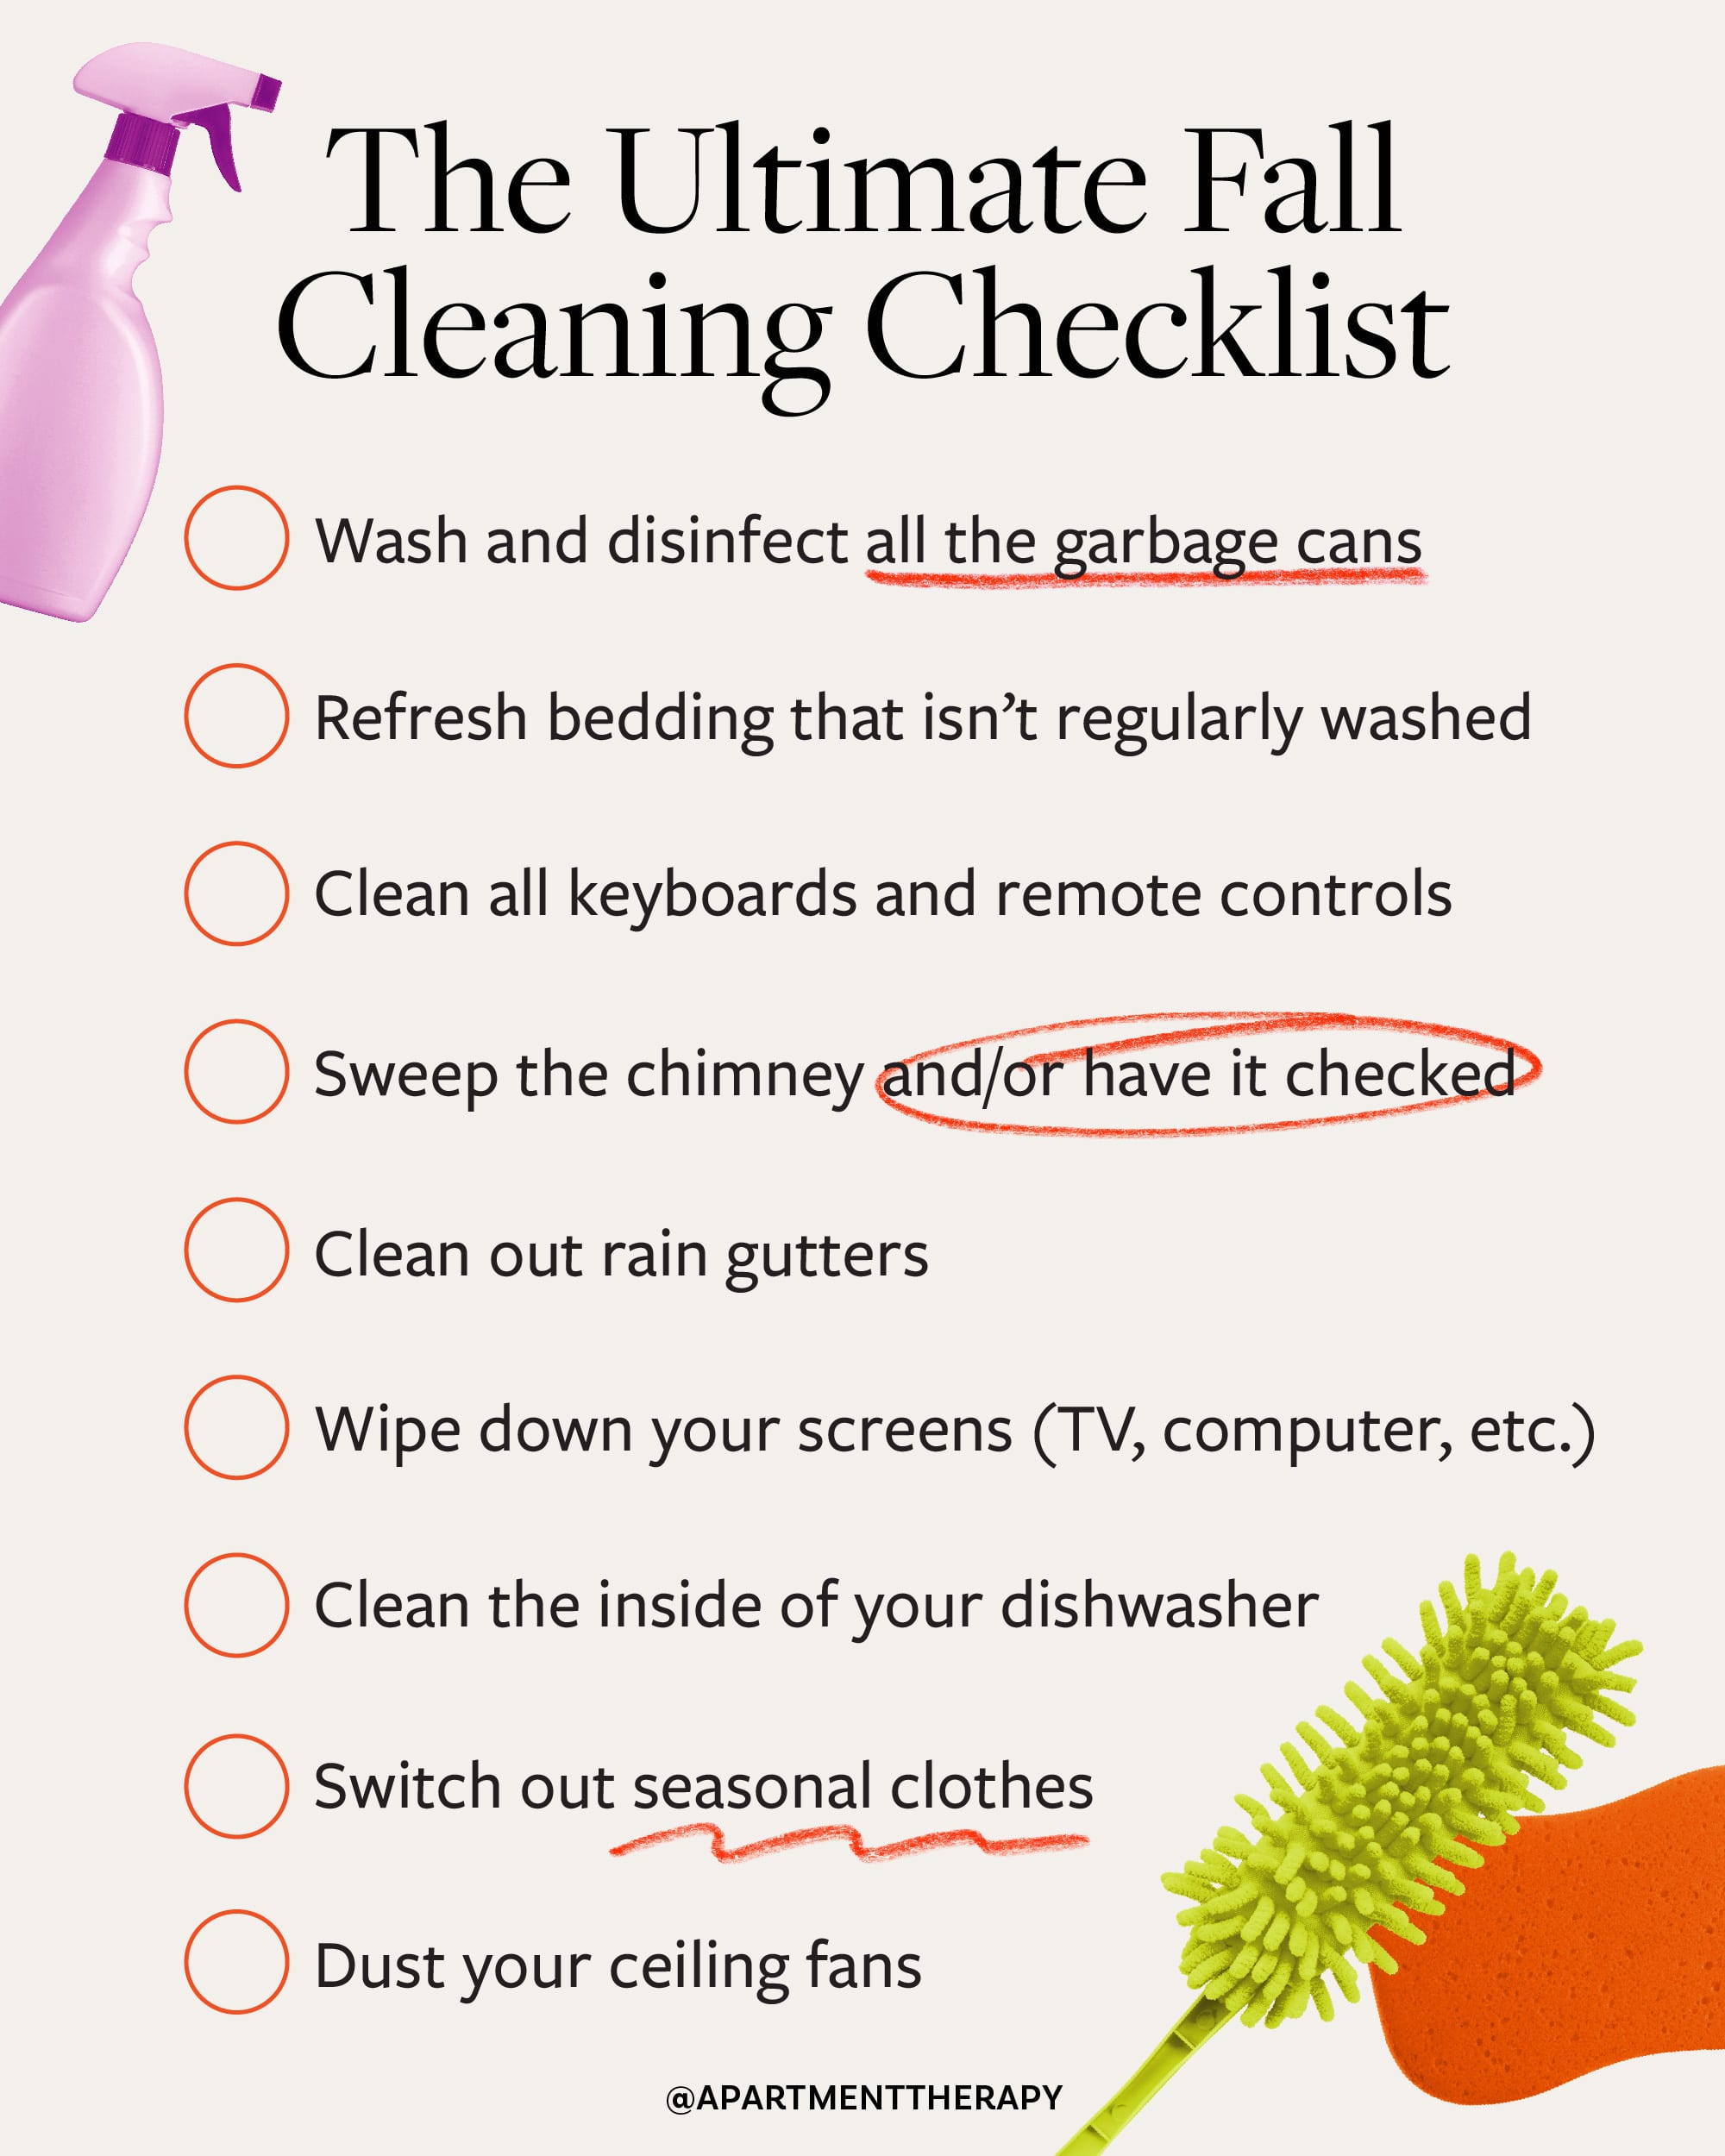 How to Do a Fall Deep Cleaning Before the Holidays - Salty Canary